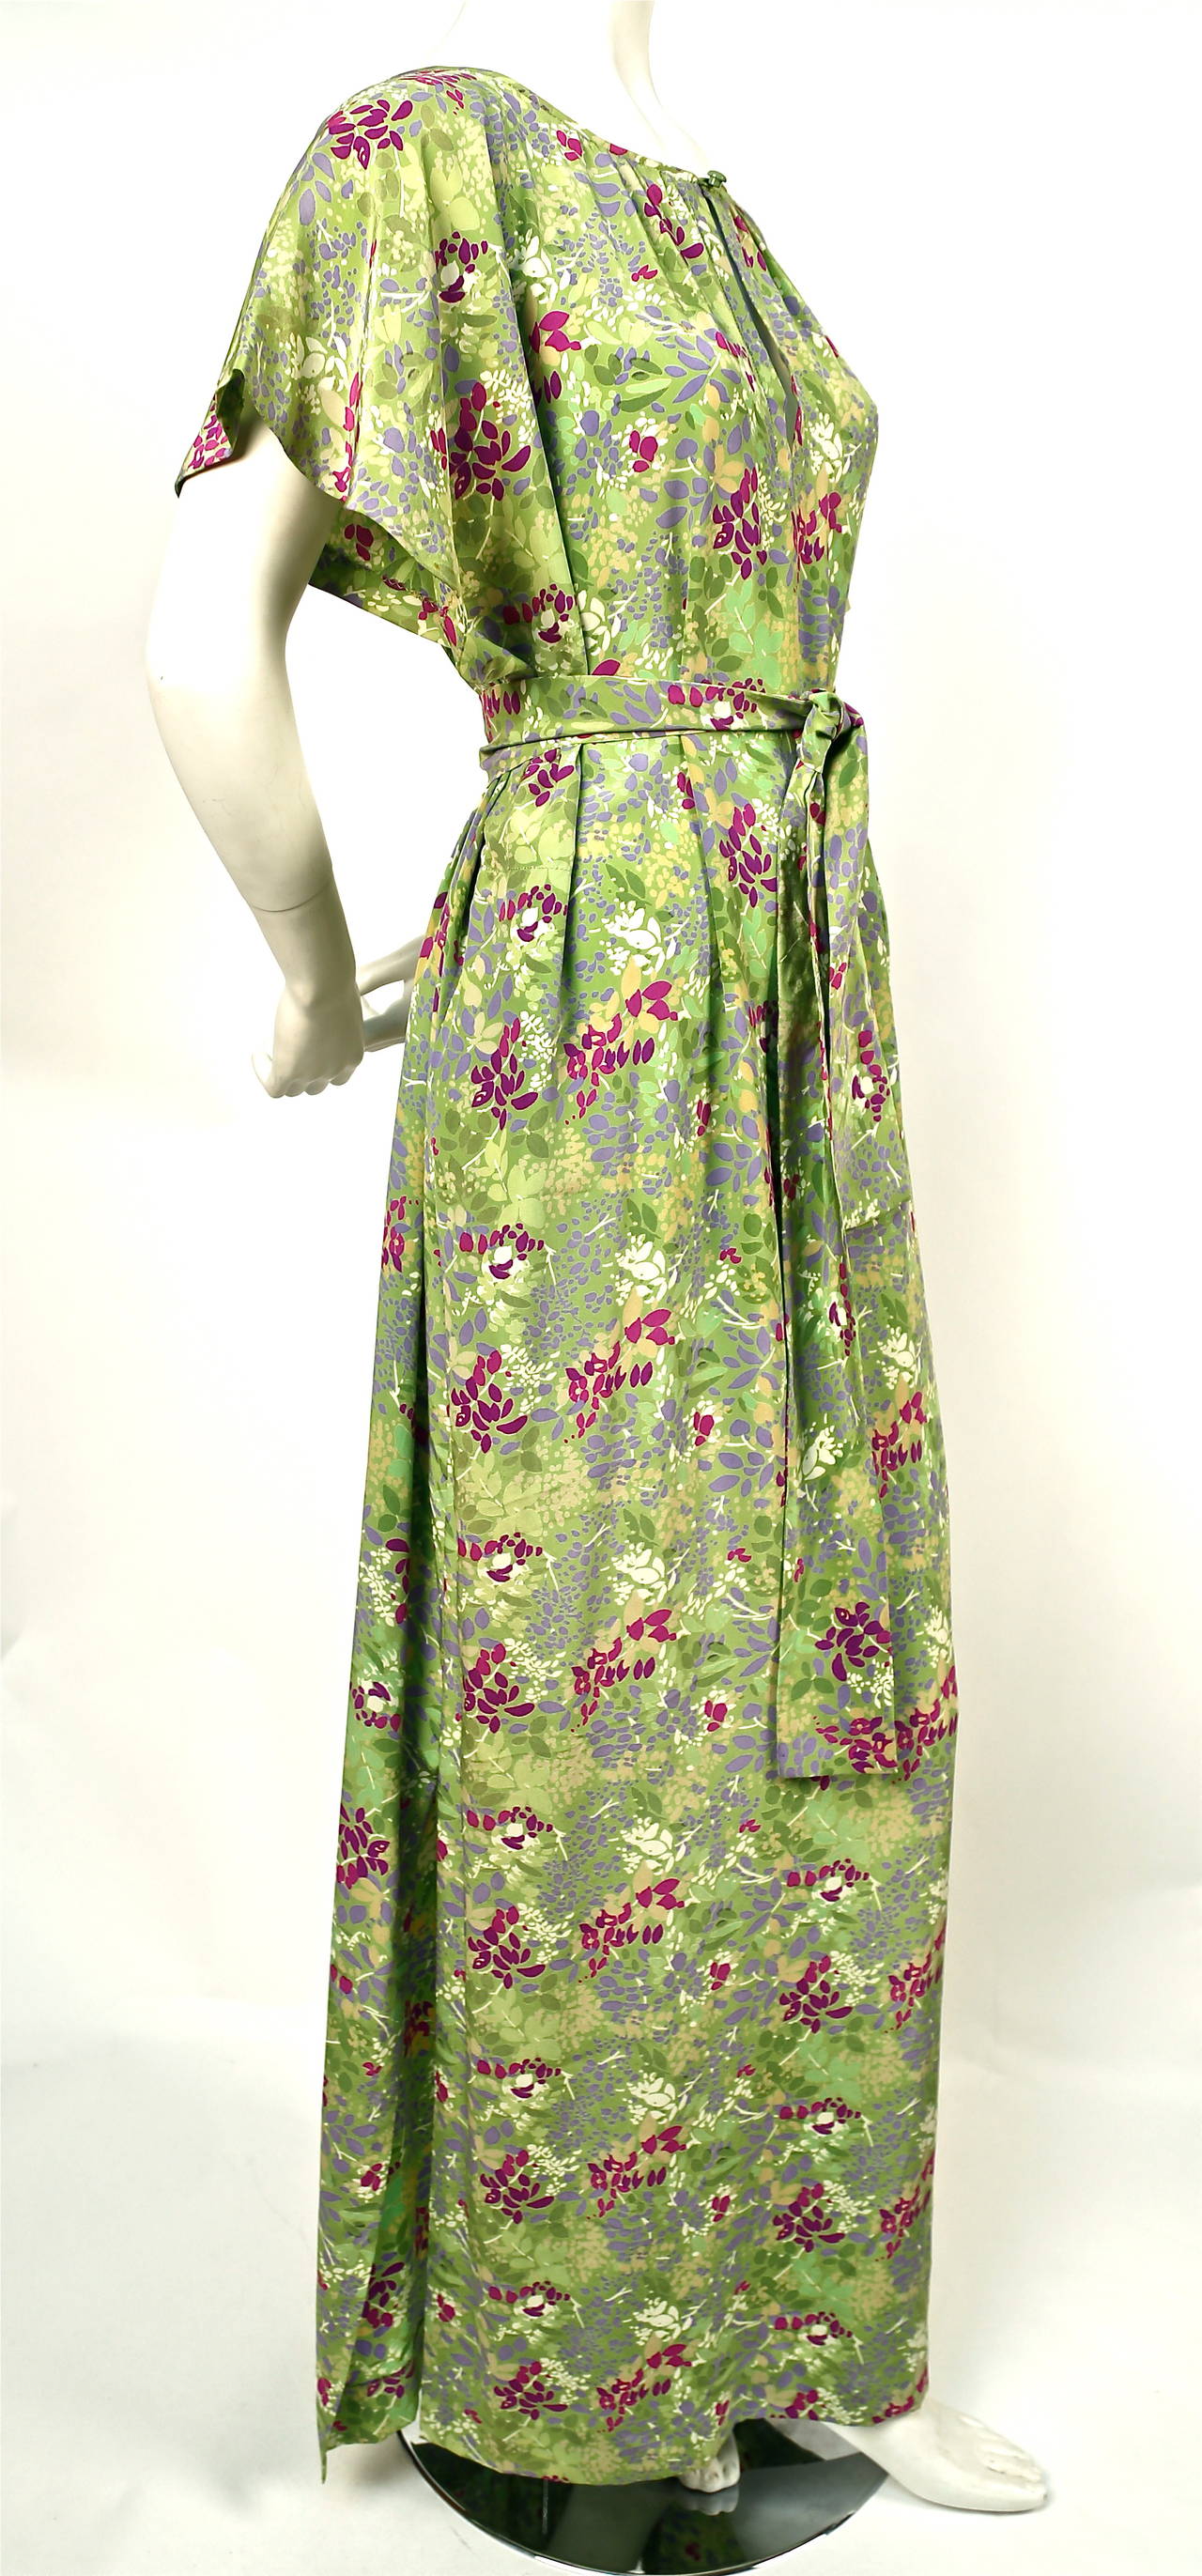 Very rare floral silk caftan gown with matching belt by Yves Saint Laurent dating to the 1970's. Labeled a French size 34 however this will easily fit up to a US 8 due to the cut. Pockets at hips. Made in France. Excellent condition.